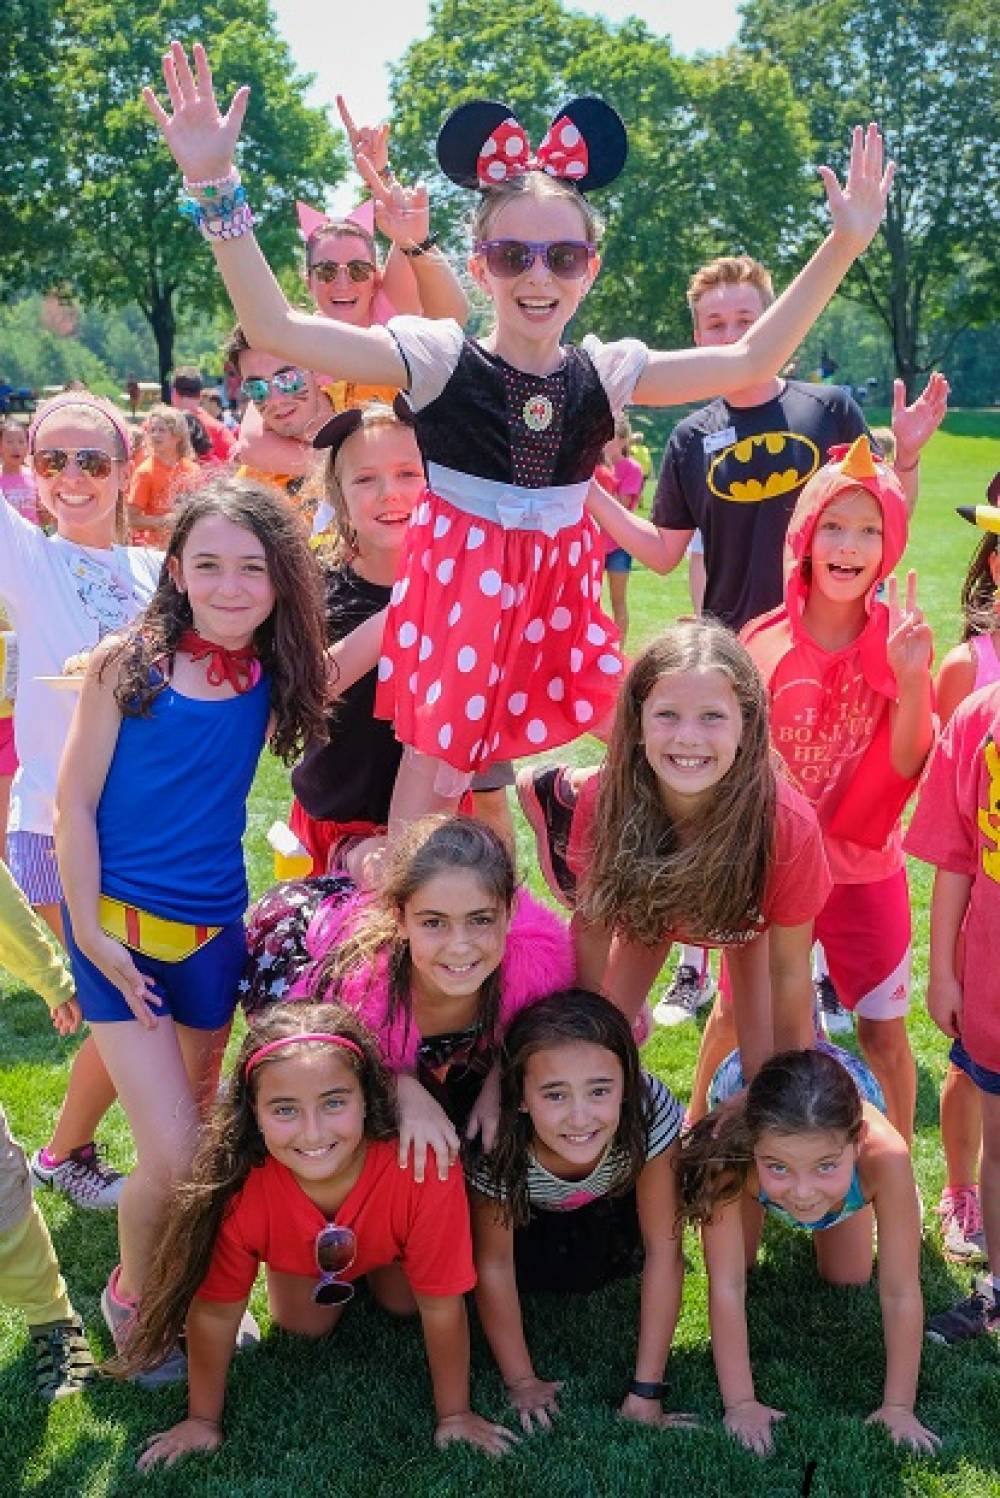 TOP MASSACHUSETTS THEATER CAMP: Nobles Day Camp is a Top Theater Summer Camp located in Dedham Massachusetts offering many fun and enriching Theater and other camp programs. 